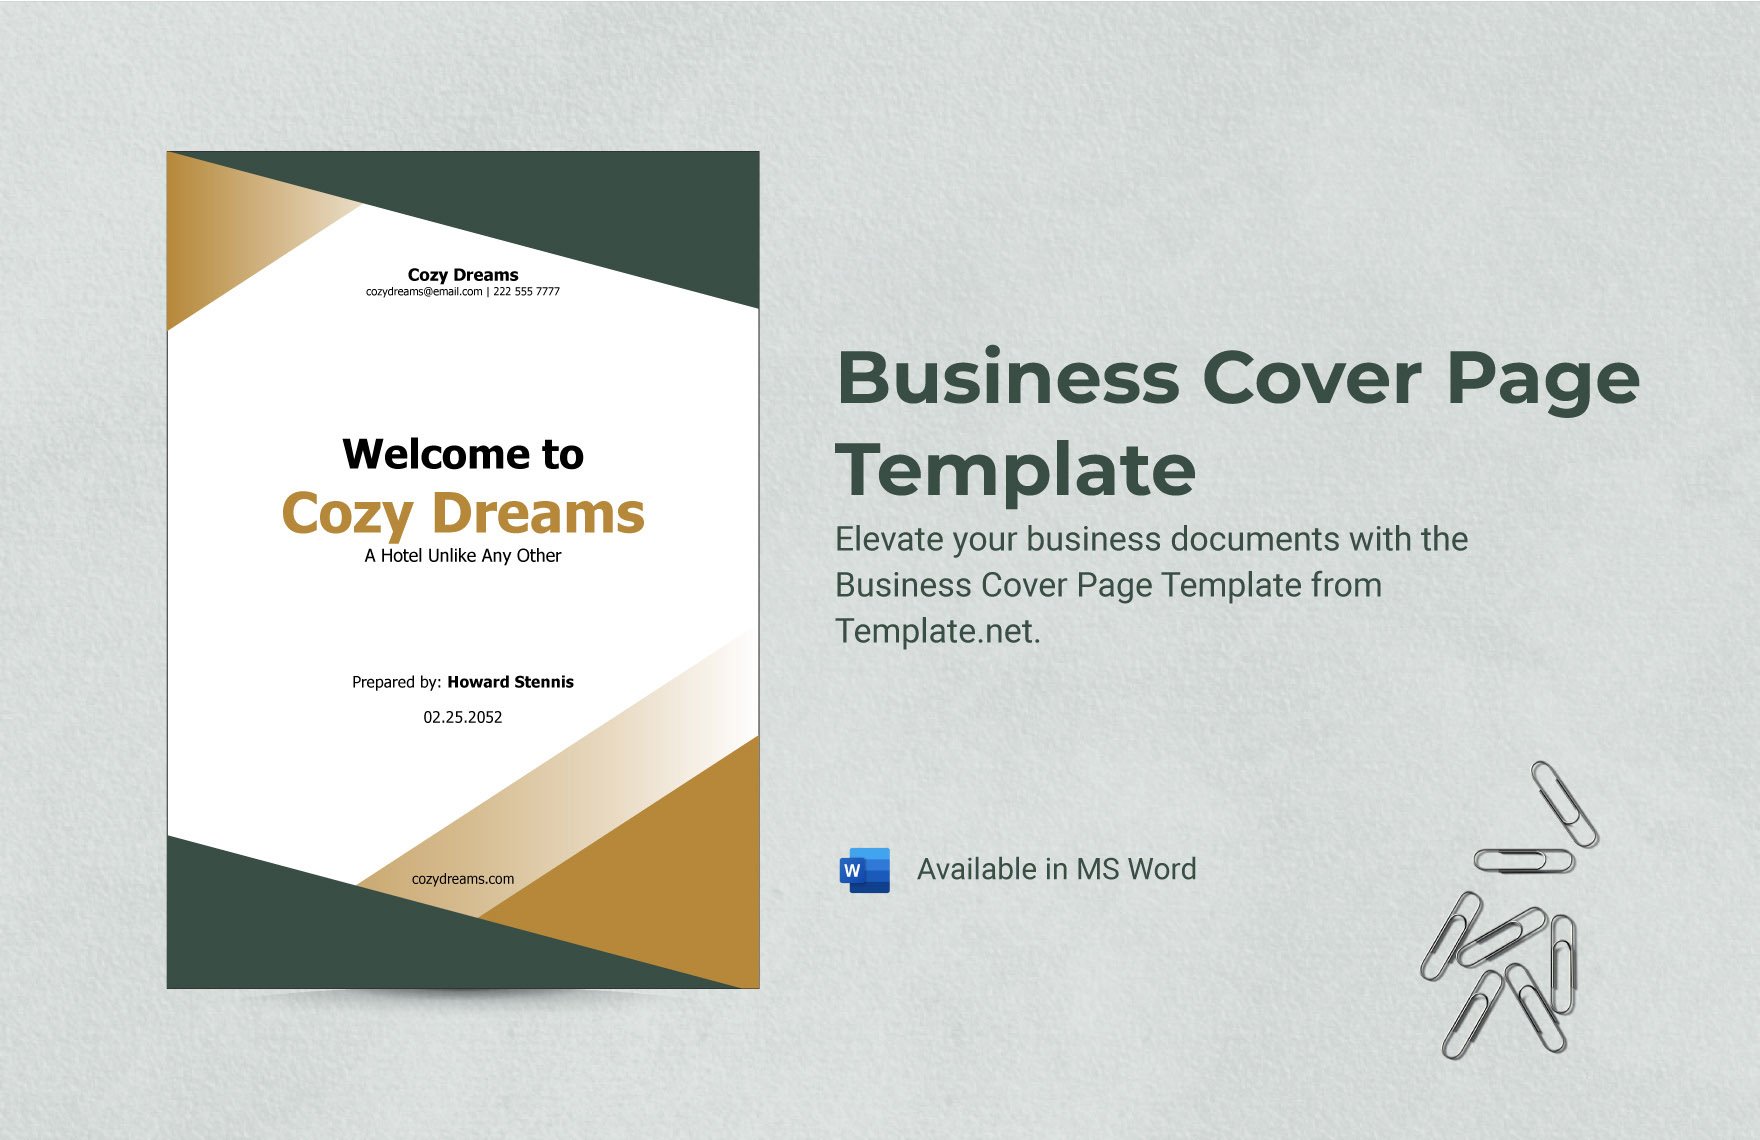 Free Business Cover Page Template in Word